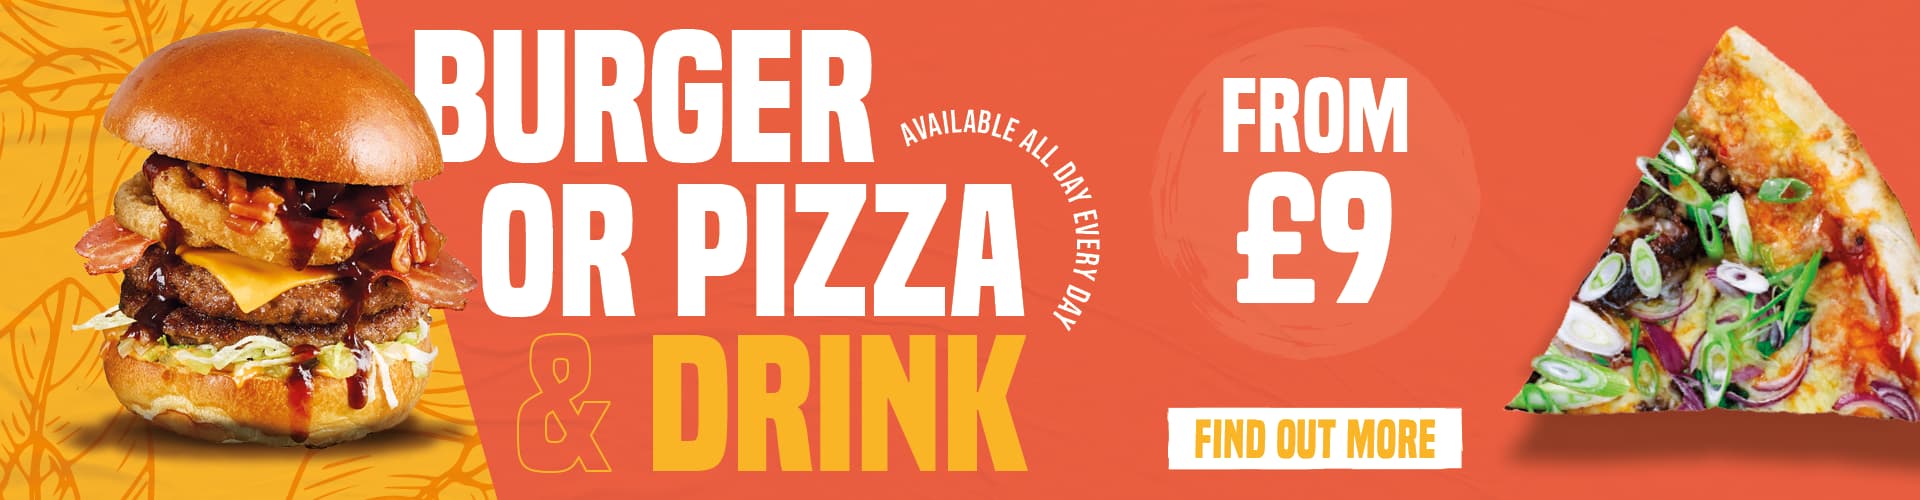 Burger or Pizza & Drink - Available All Day Every Day From £9. Find Out More!